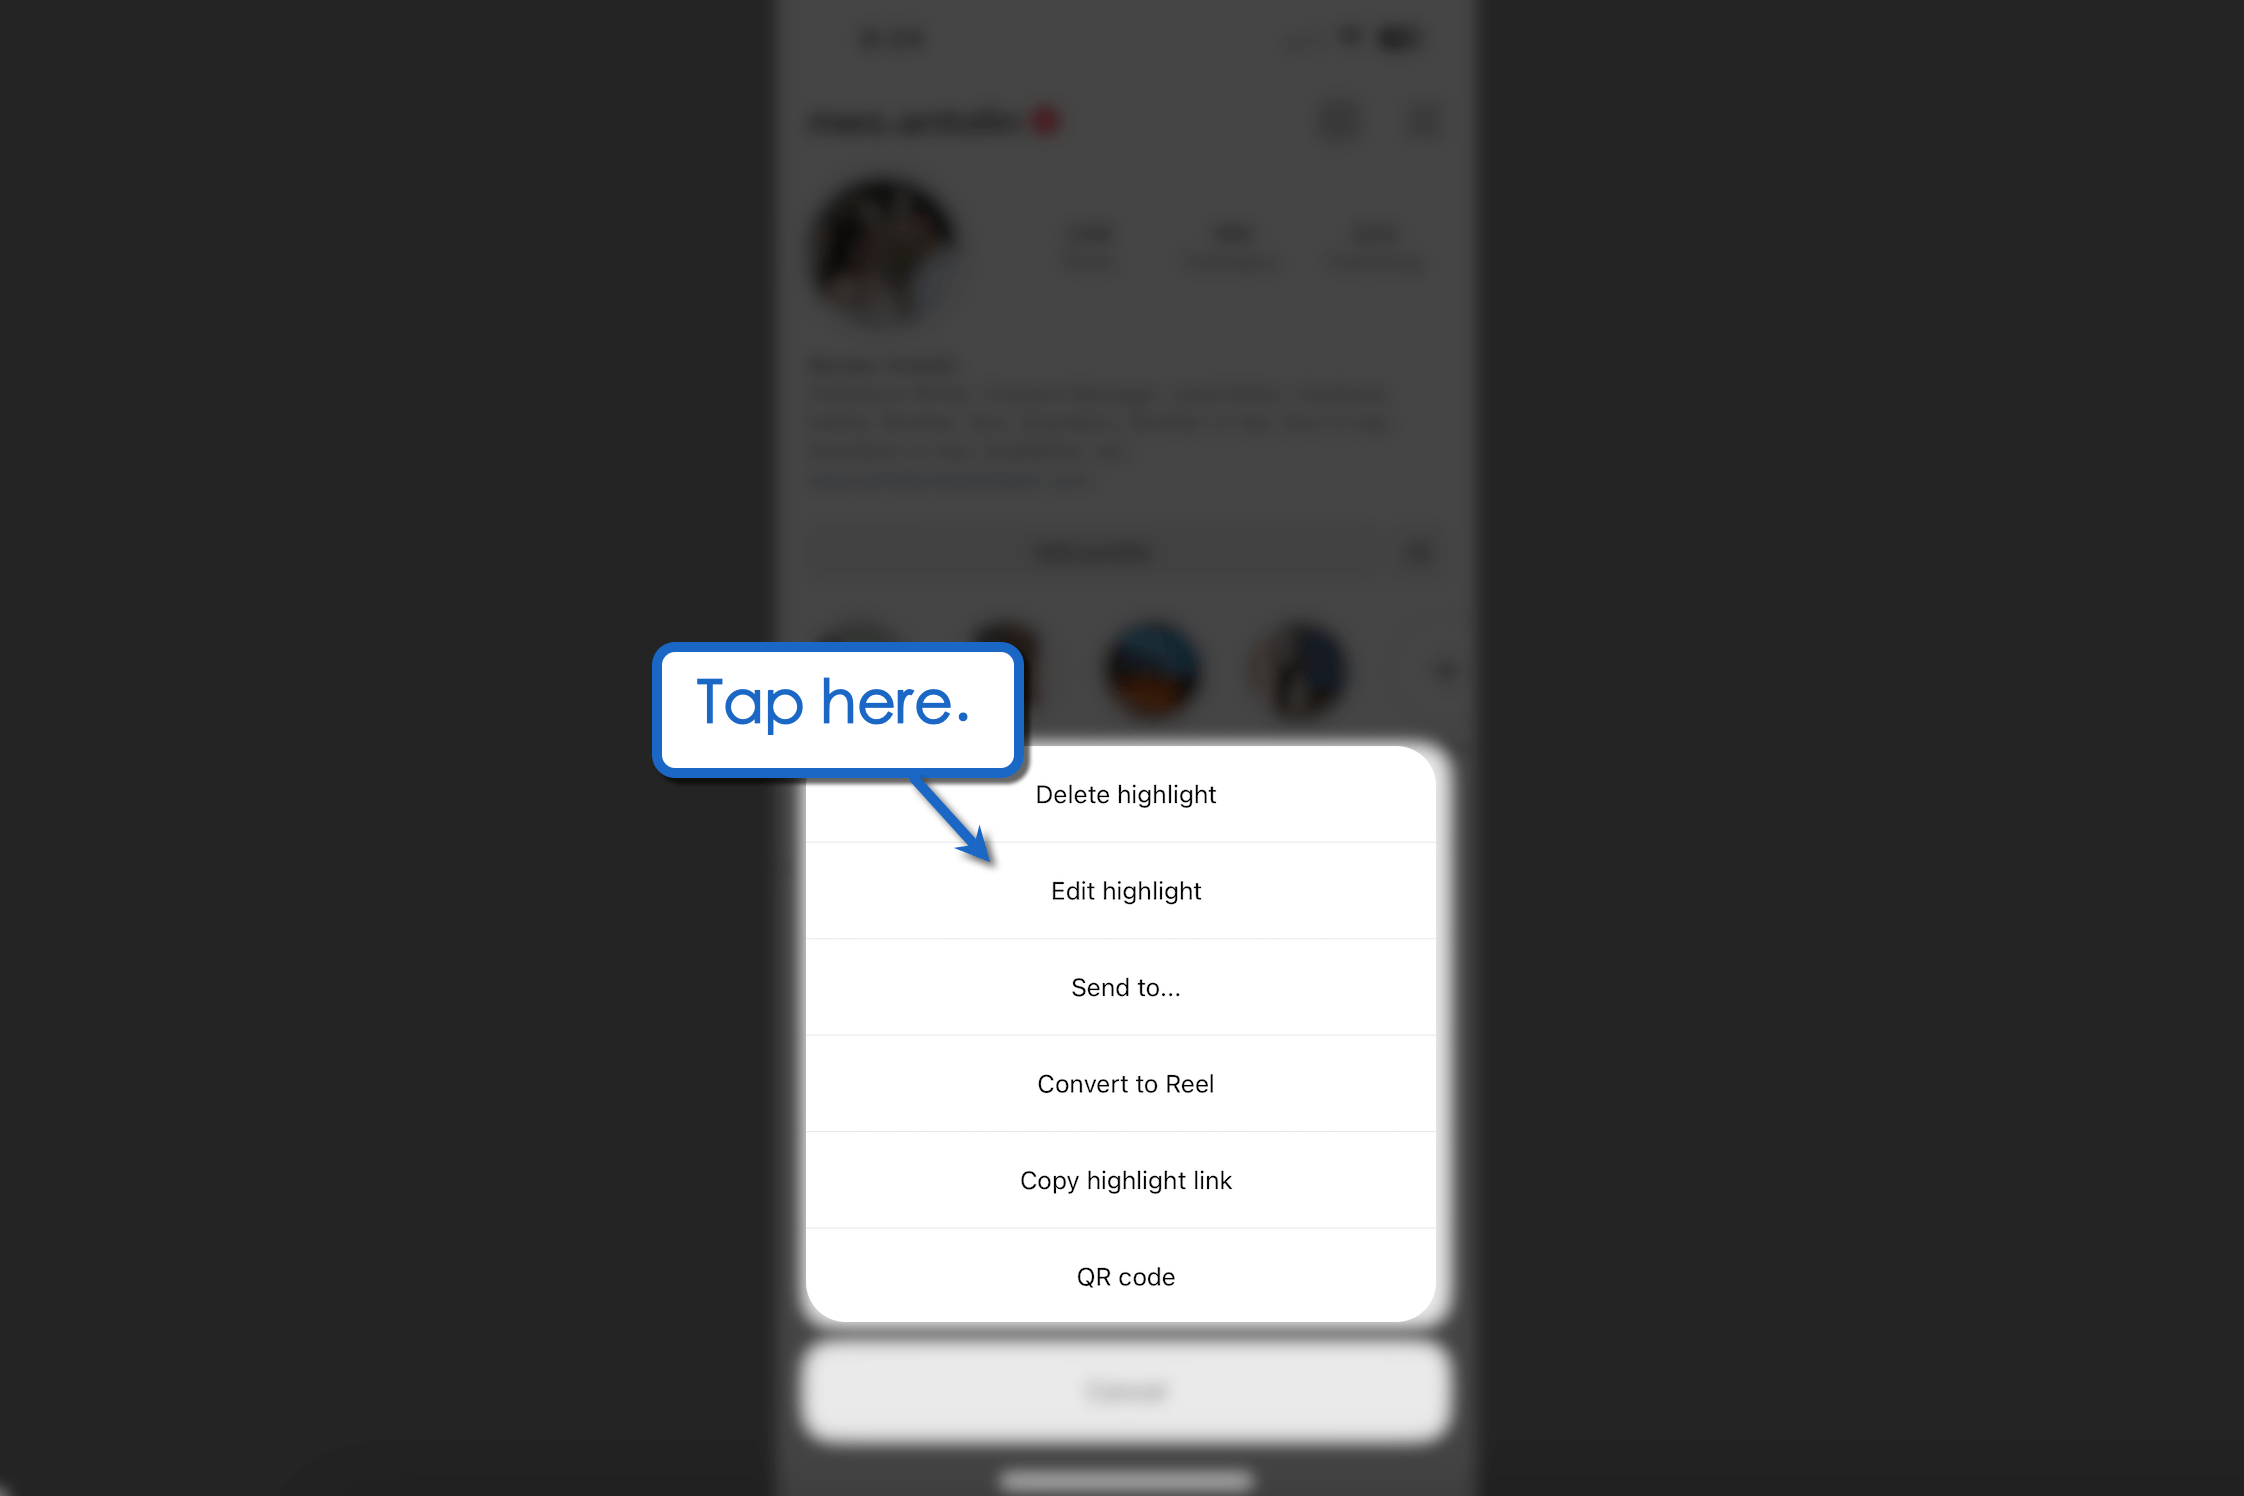 Tap and hold the highlight you want to edit.